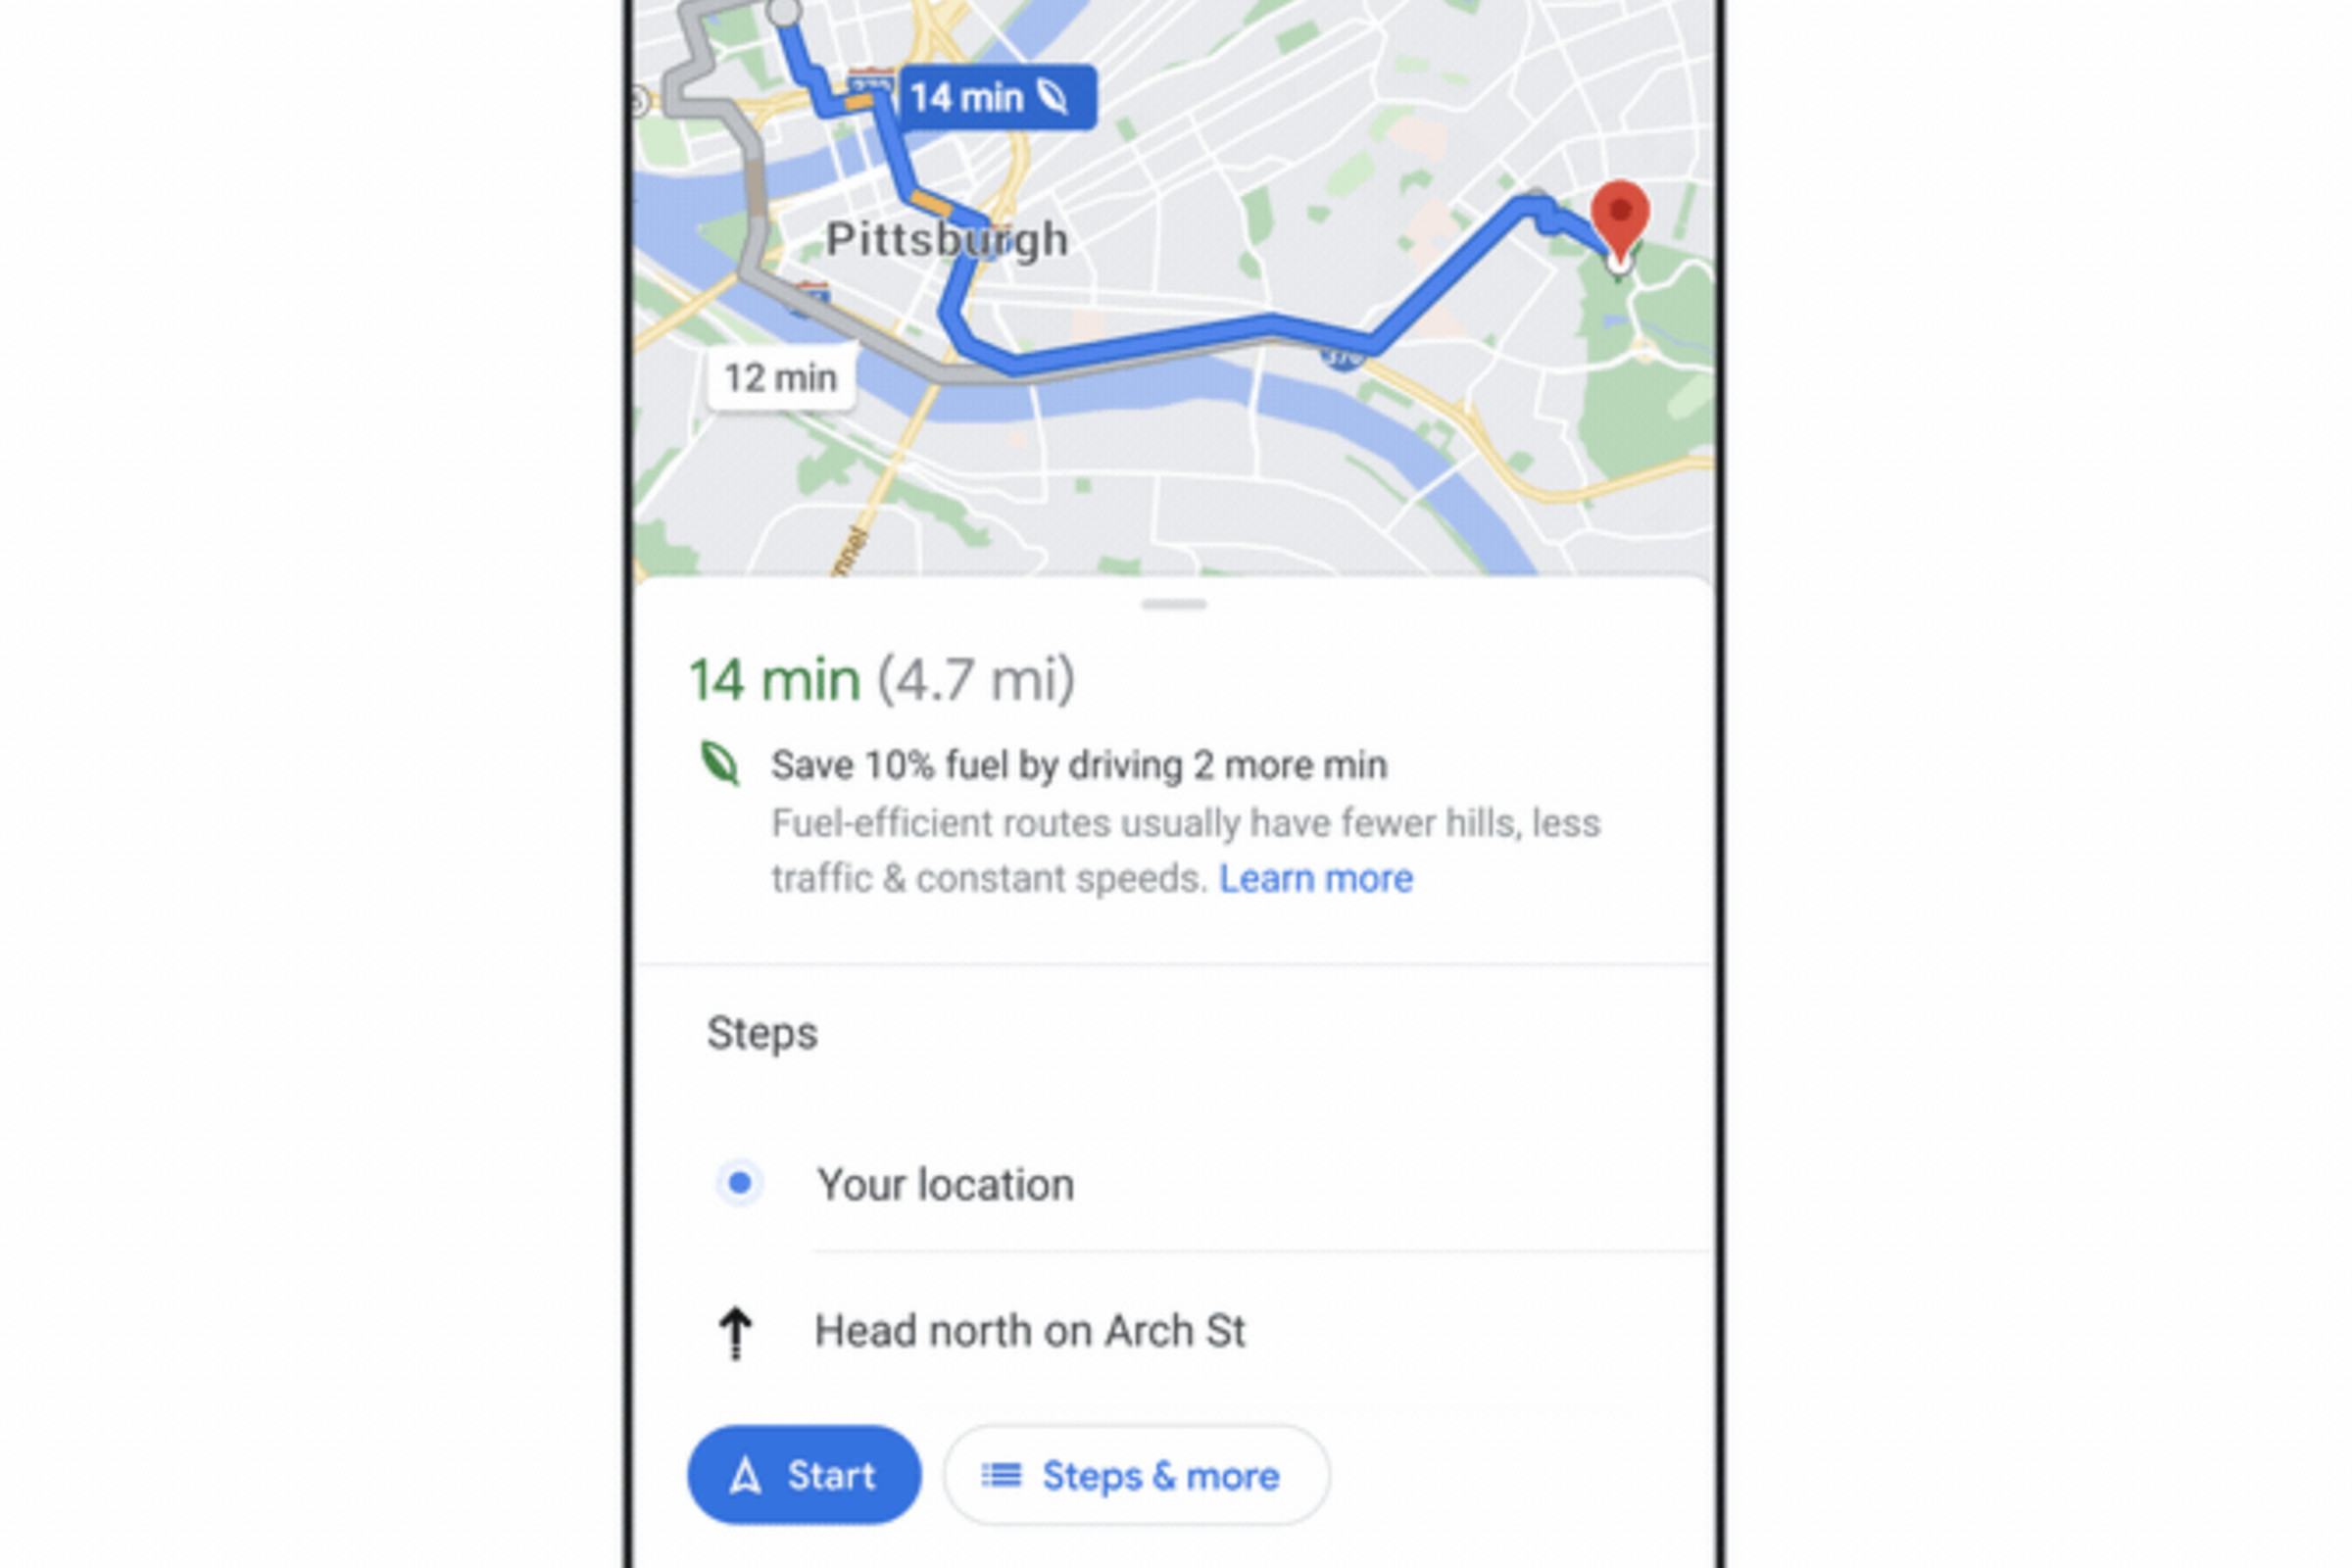 A screenshot of the Google Maps app displaying a route it says can save 10 percent of fuel by “driving 2 more” minutes.